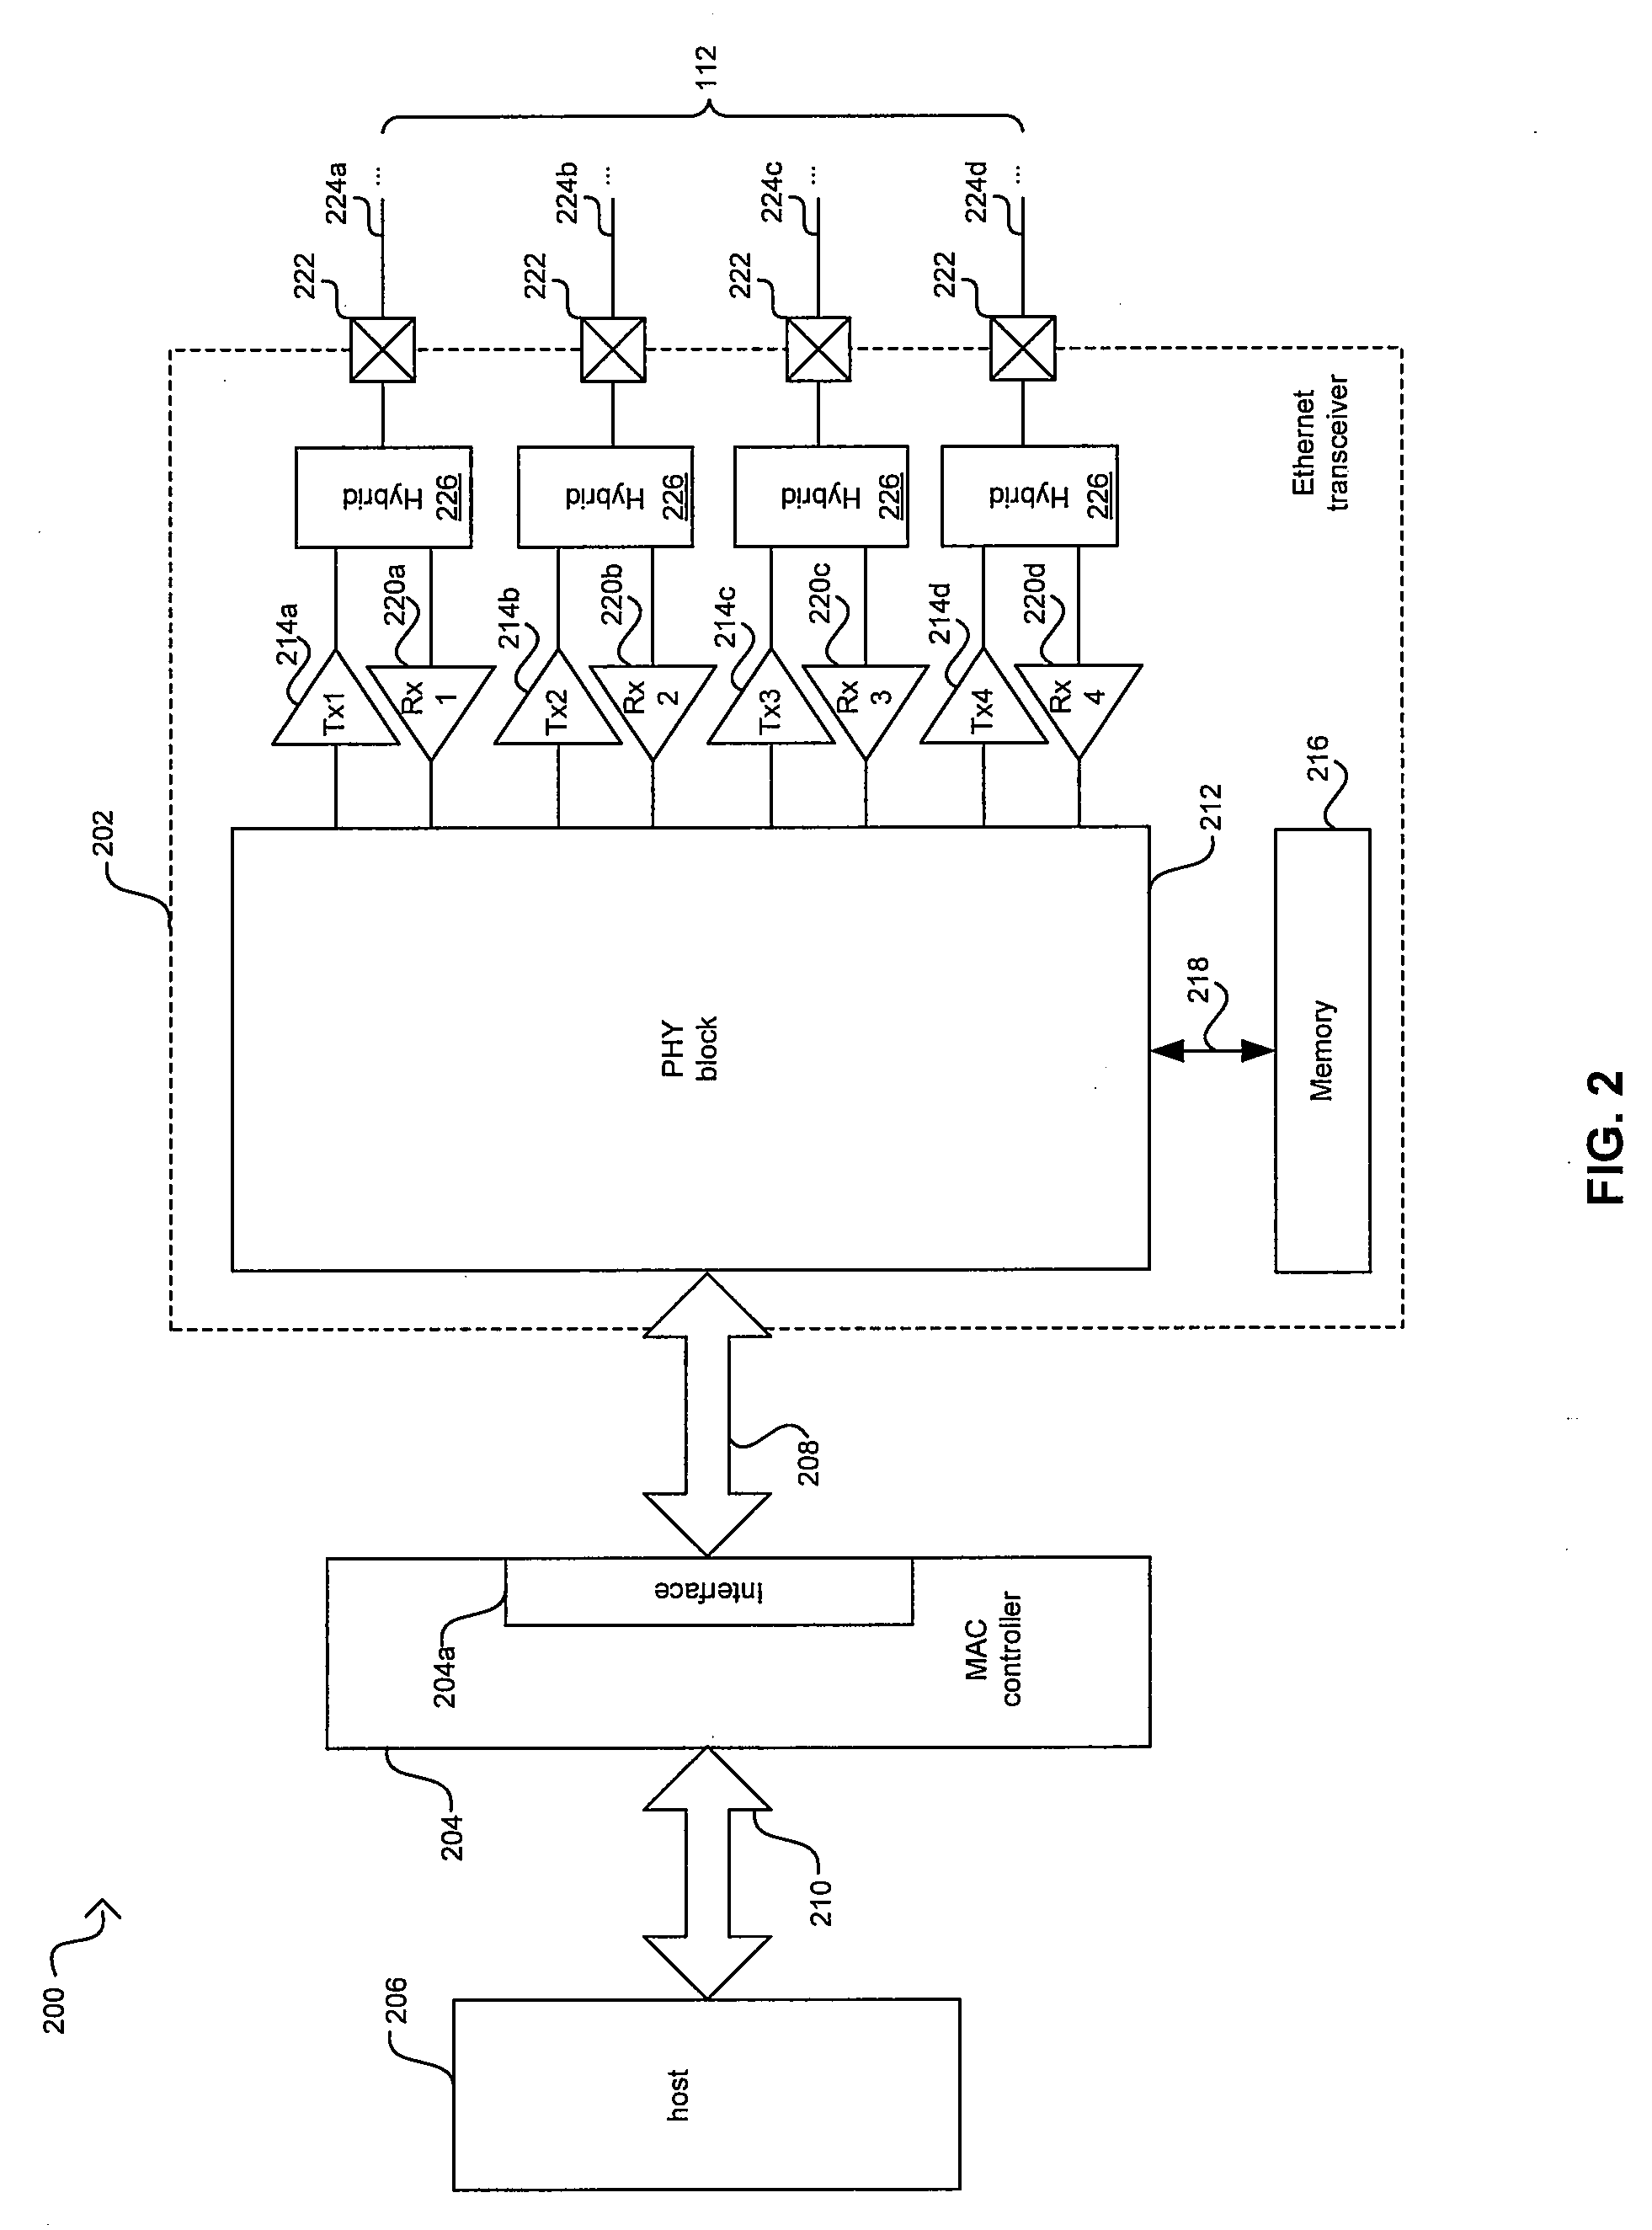 Method And System For Monitoring And Training Ethernet Channels To Support Energy Efficient Ethernet Networks